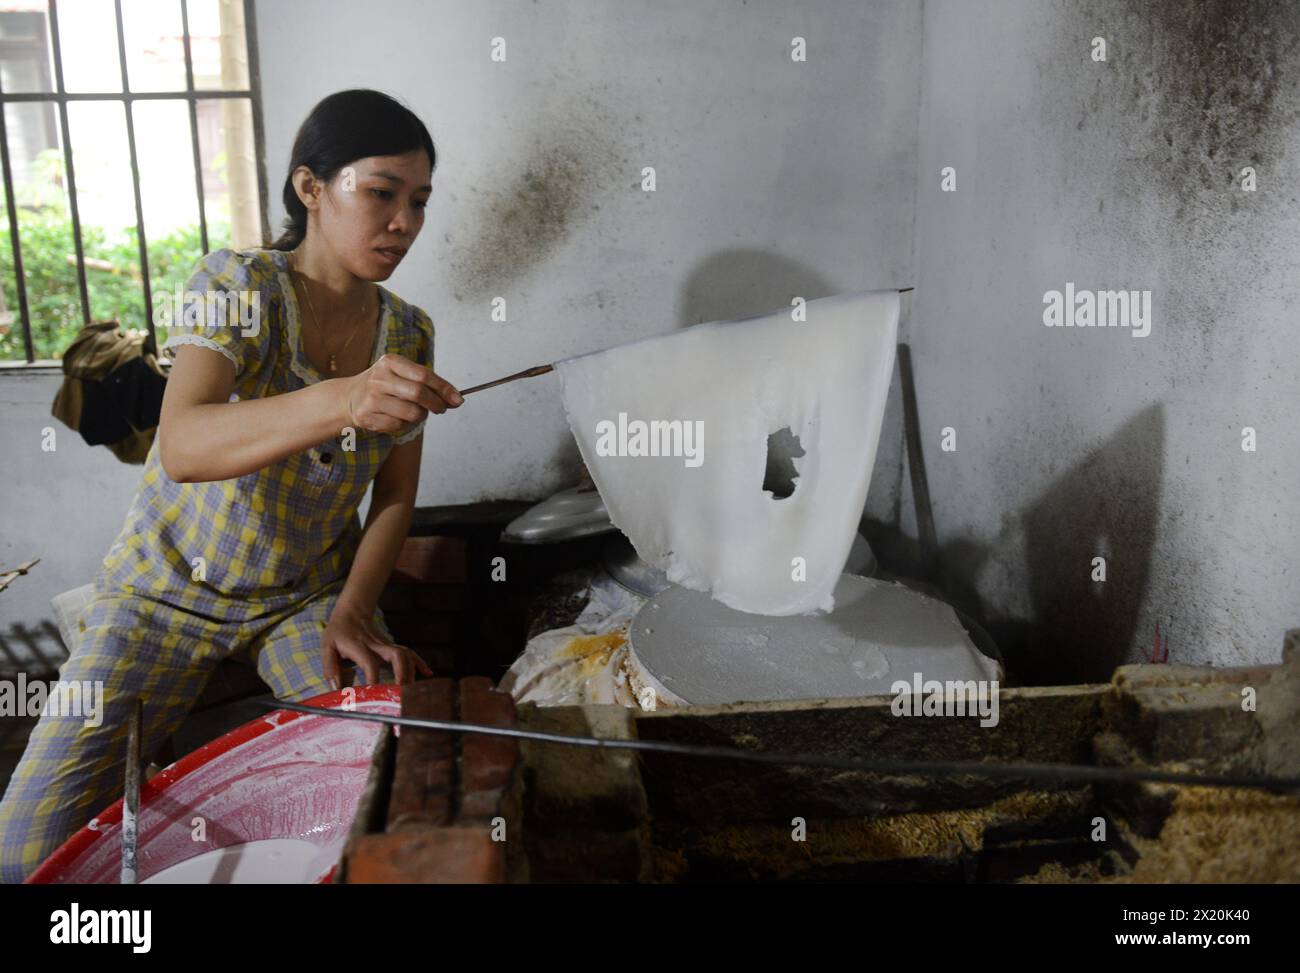 Traditional rice noodle production in a small family business on Cam Kim Island, Hoi An, Vietnam. Stock Photo